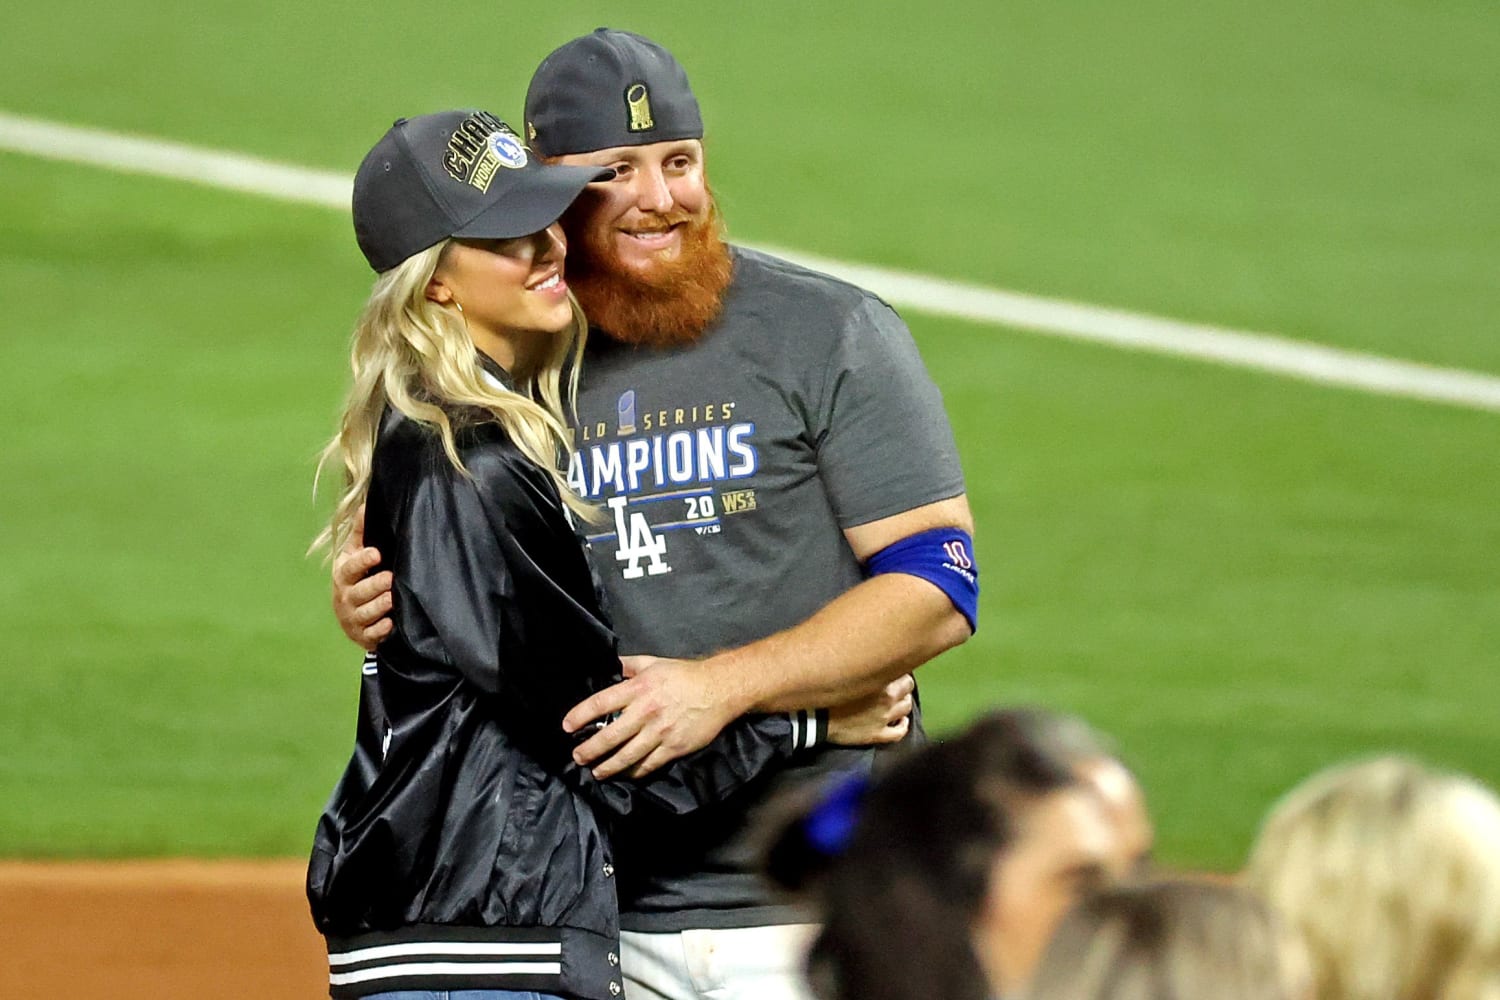 After family tragedy, couple connects with Justin Turner